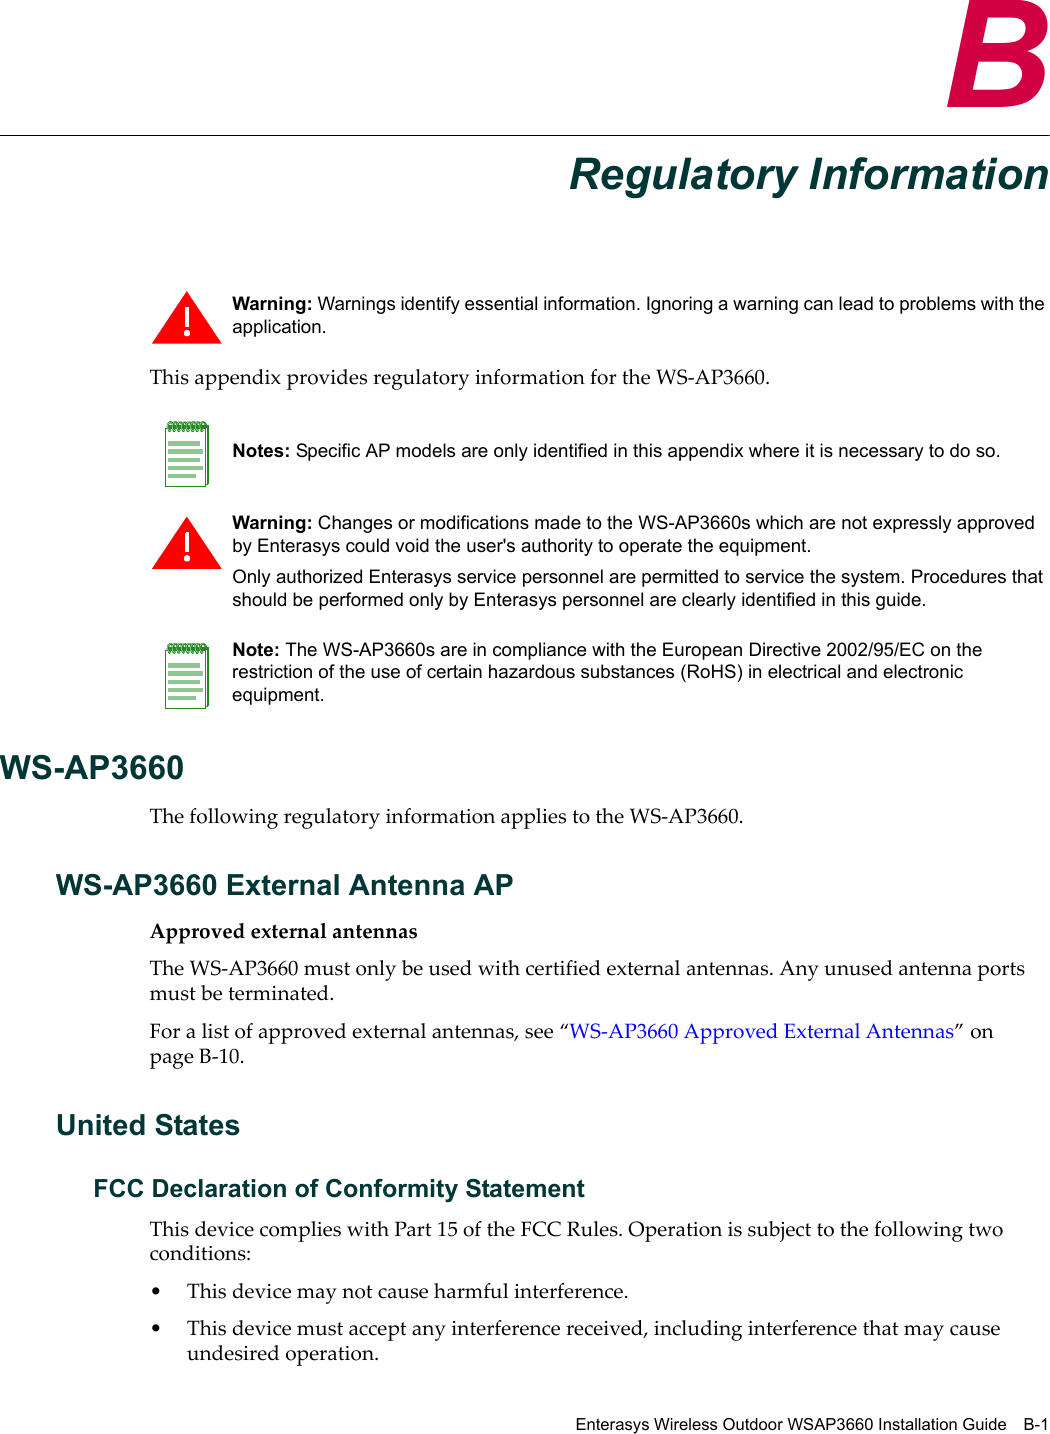 Enterasys Wireless Outdoor WSAP3660 Installation Guide B-1BRegulatory InformationThis appendix provides regulatory information for the WS-AP3660.WS-AP3660The following regulatory information applies to the WS-AP3660.WS-AP3660 External Antenna APApproved external antennasThe WS-AP3660 must only be used with certified external antennas. Any unused antenna ports must be terminated. For a list of approved external antennas, see “WS-AP3660 Approved External Antennas” on page B-10.United StatesFCC Declaration of Conformity StatementThis device complies with Part 15 of the FCC Rules. Operation is subject to the following two conditions:• This device may not cause harmful interference.• This device must accept any interference received, including interference that may cause undesired operation.Warning: Warnings identify essential information. Ignoring a warning can lead to problems with the application.Notes: Specific AP models are only identified in this appendix where it is necessary to do so. Warning: Changes or modifications made to the WS-AP3660s which are not expressly approved by Enterasys could void the user&apos;s authority to operate the equipment.Only authorized Enterasys service personnel are permitted to service the system. Procedures that should be performed only by Enterasys personnel are clearly identified in this guide.Note: The WS-AP3660s are in compliance with the European Directive 2002/95/EC on the restriction of the use of certain hazardous substances (RoHS) in electrical and electronic equipment.